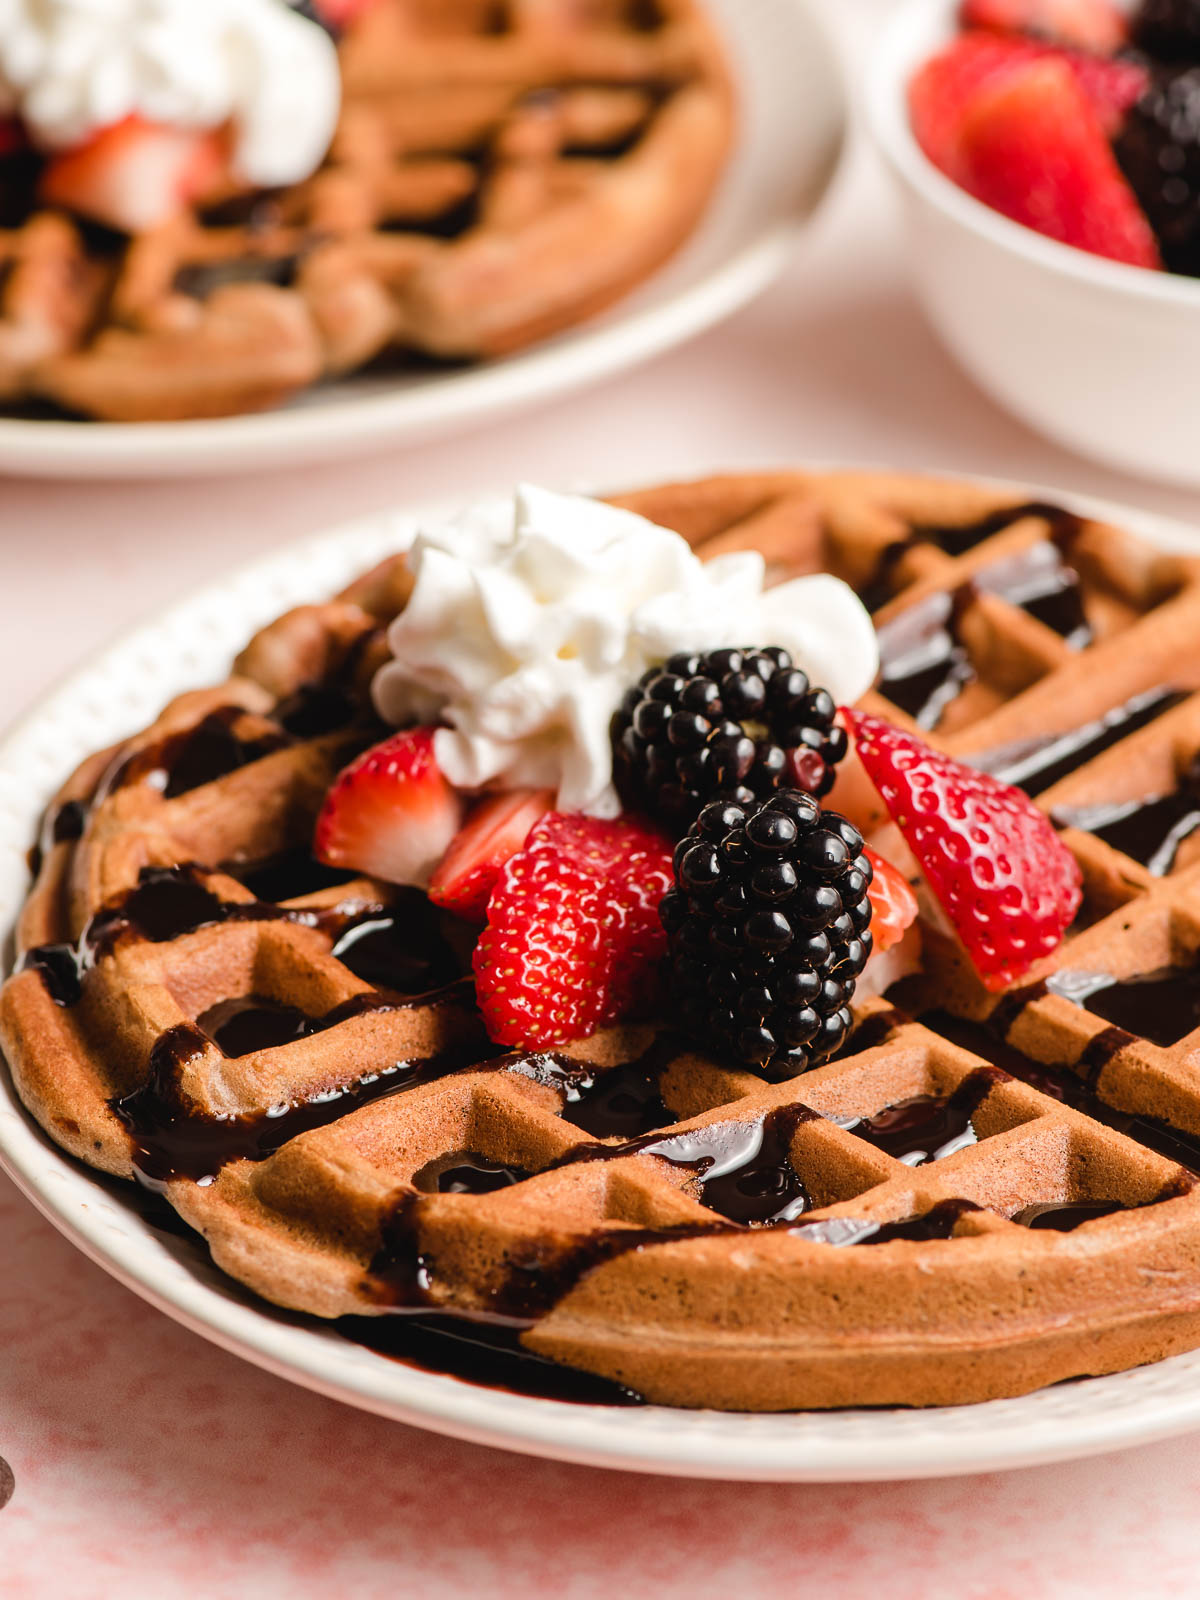 Chocolate waffle topped with strwaberries, whipped cream, and blackberries.